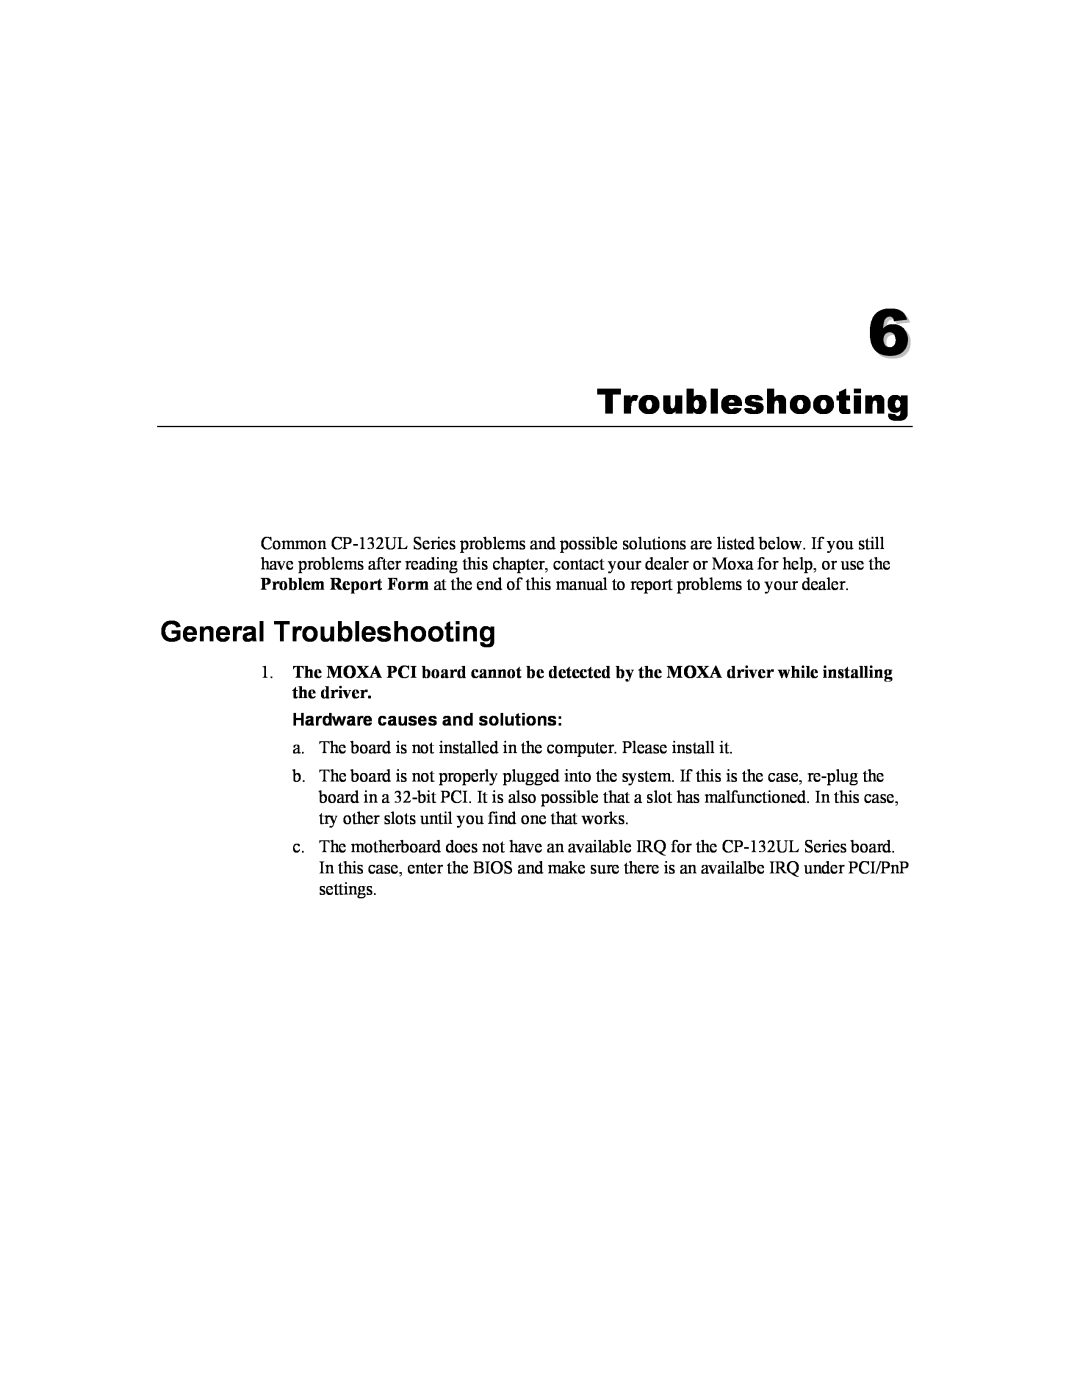 Moxa Technologies CP-132U Series user manual General Troubleshooting, Hardware causes and solutions 